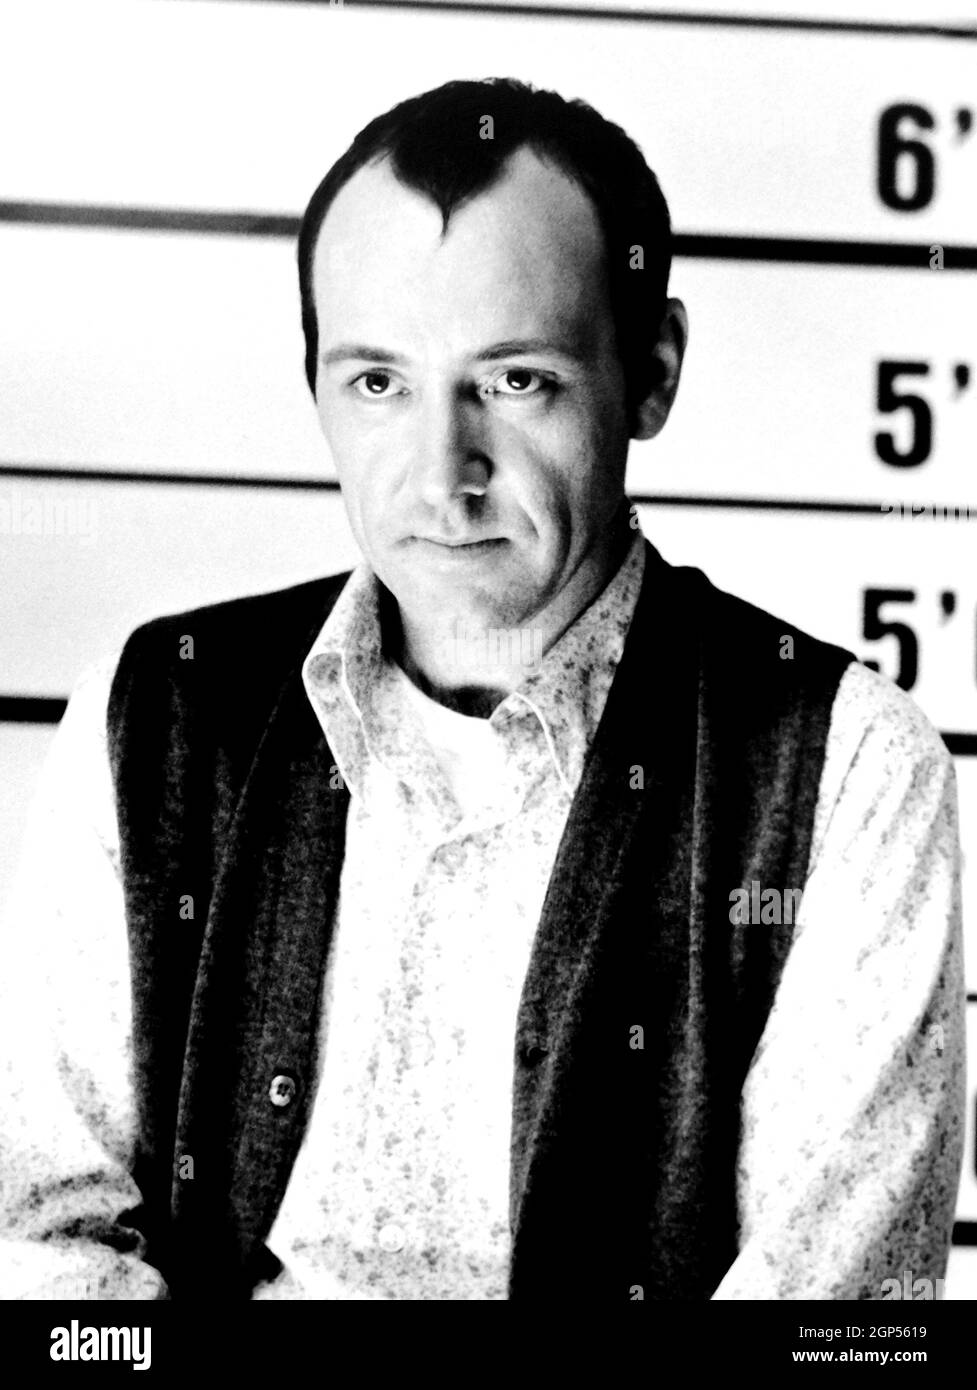 Watching The Usual Suspects (1995) 4K Tonight! Starring Kevin Spacey! :  r/HD_MOVIE_SOURCE